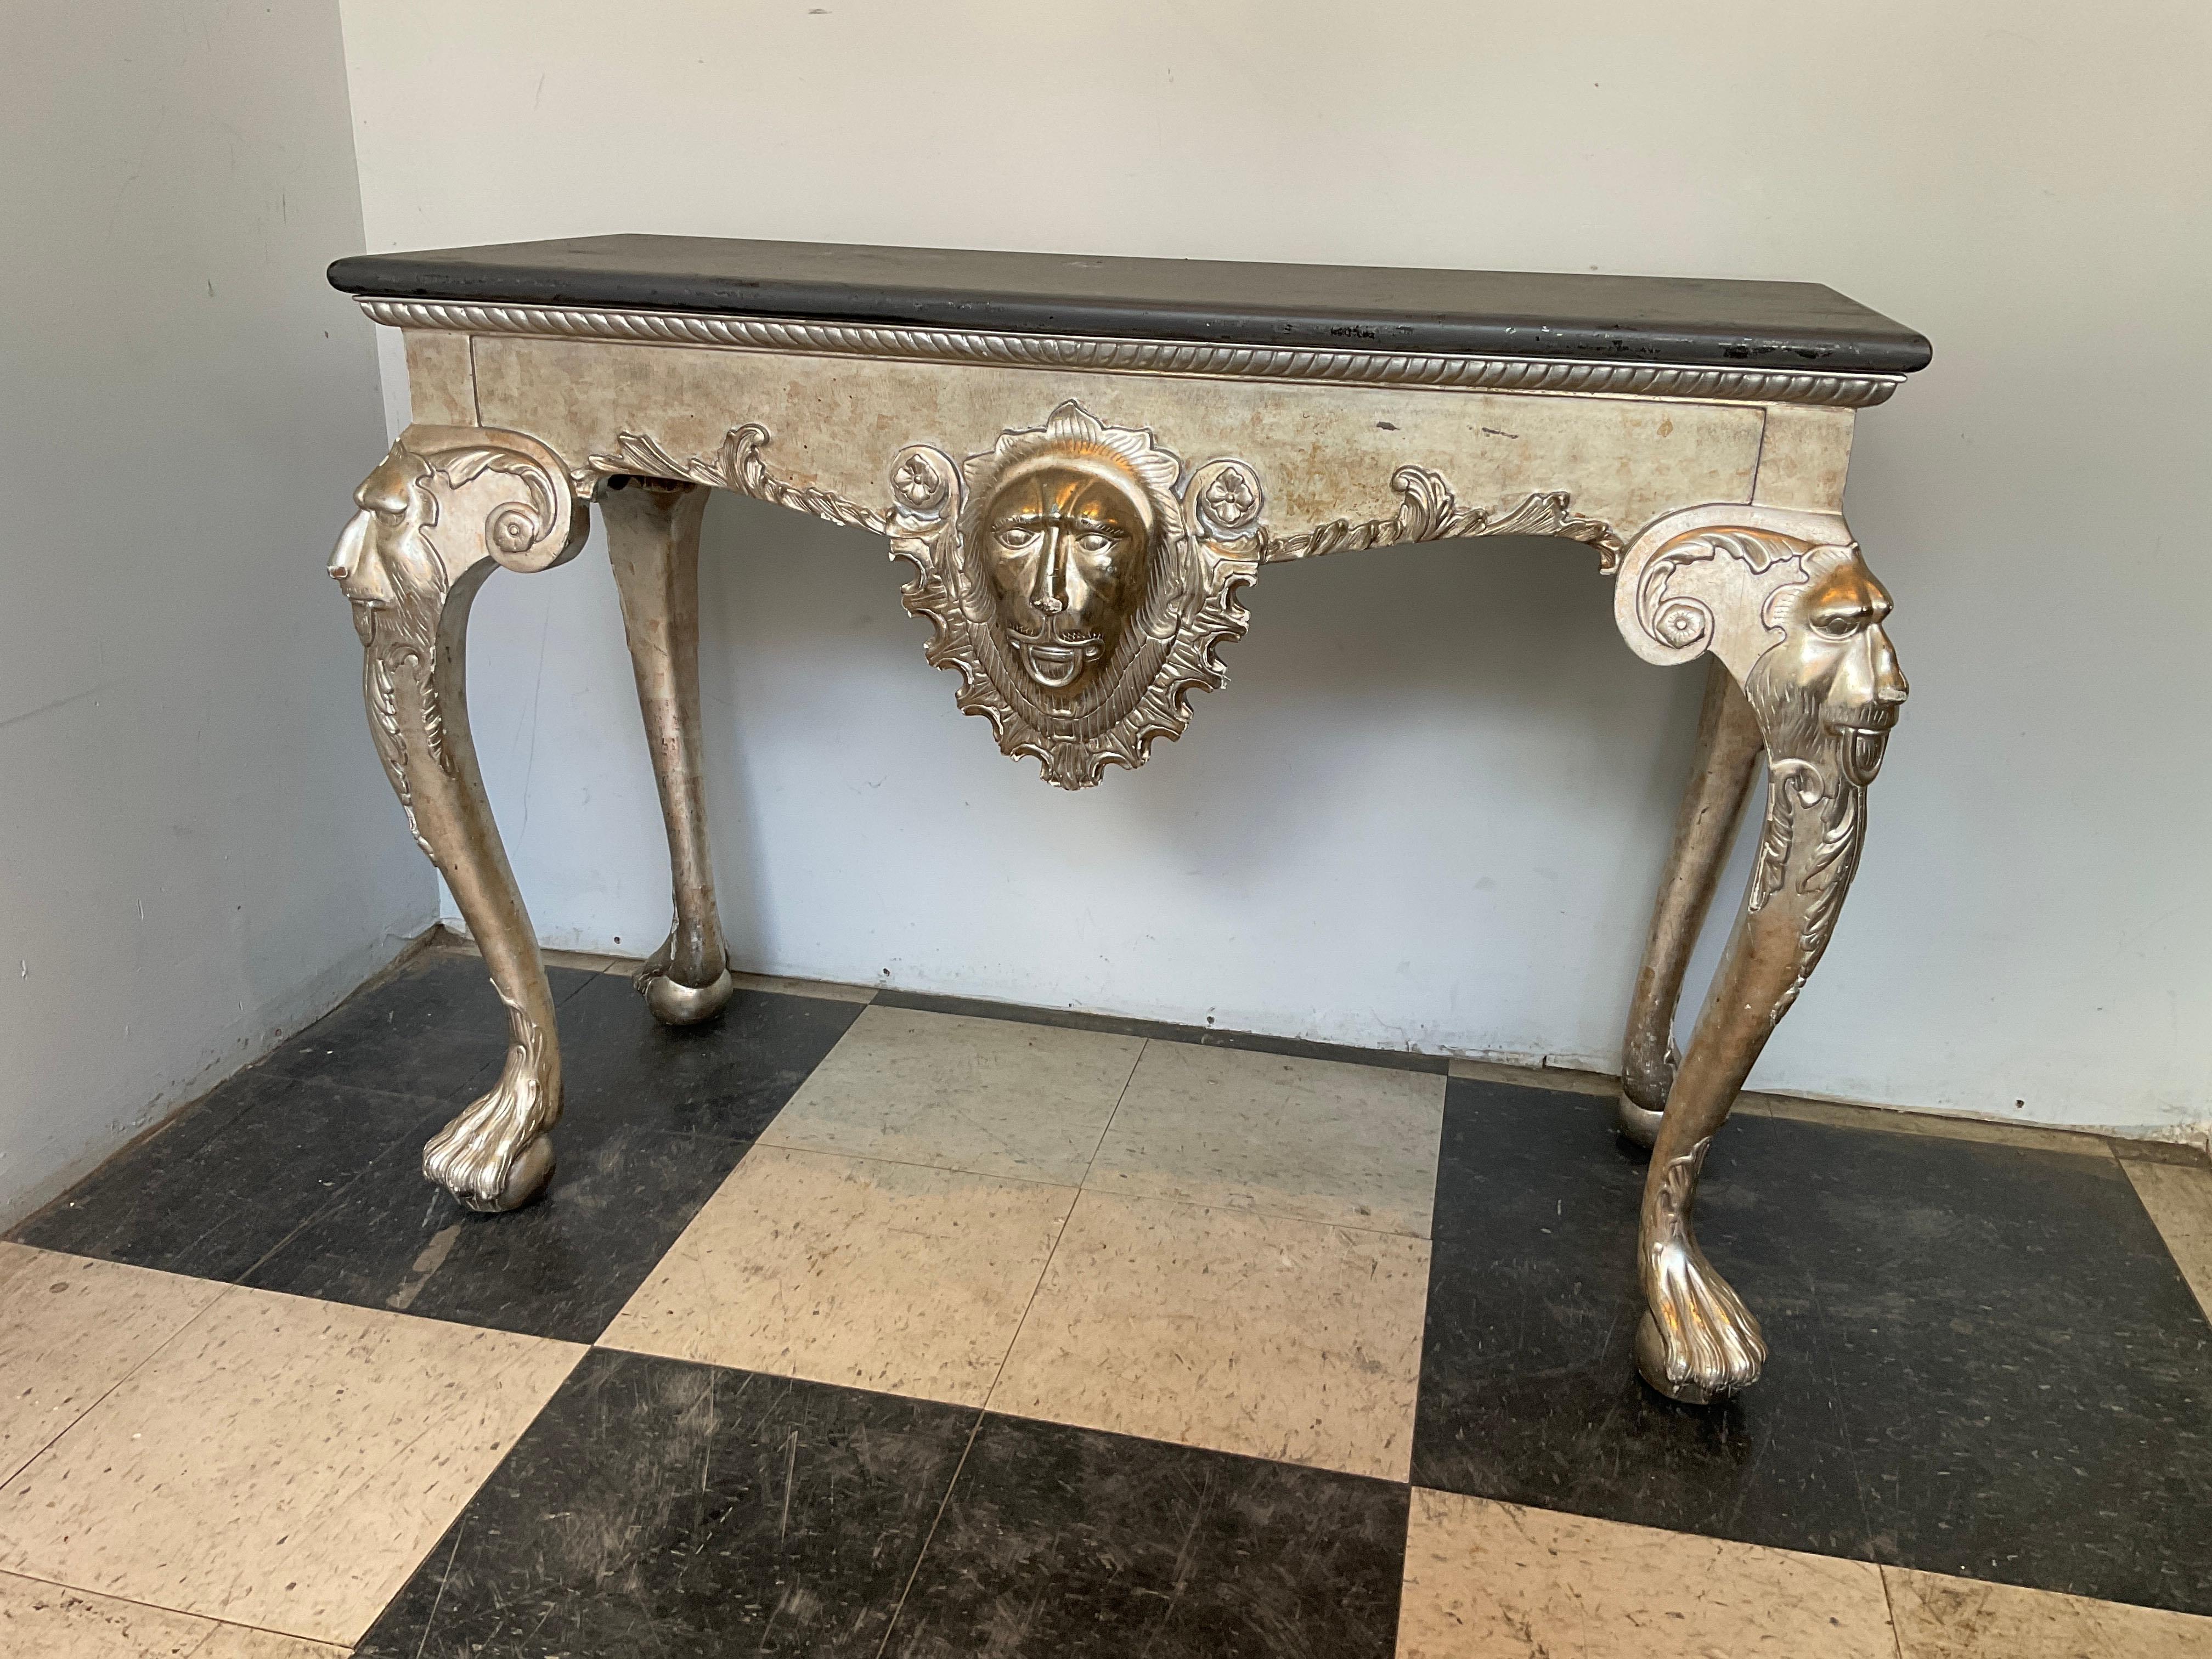 Hand carved wood lion console, silver leaf finish. Top is distressed, some silver leaf gone, as shown in pictures.